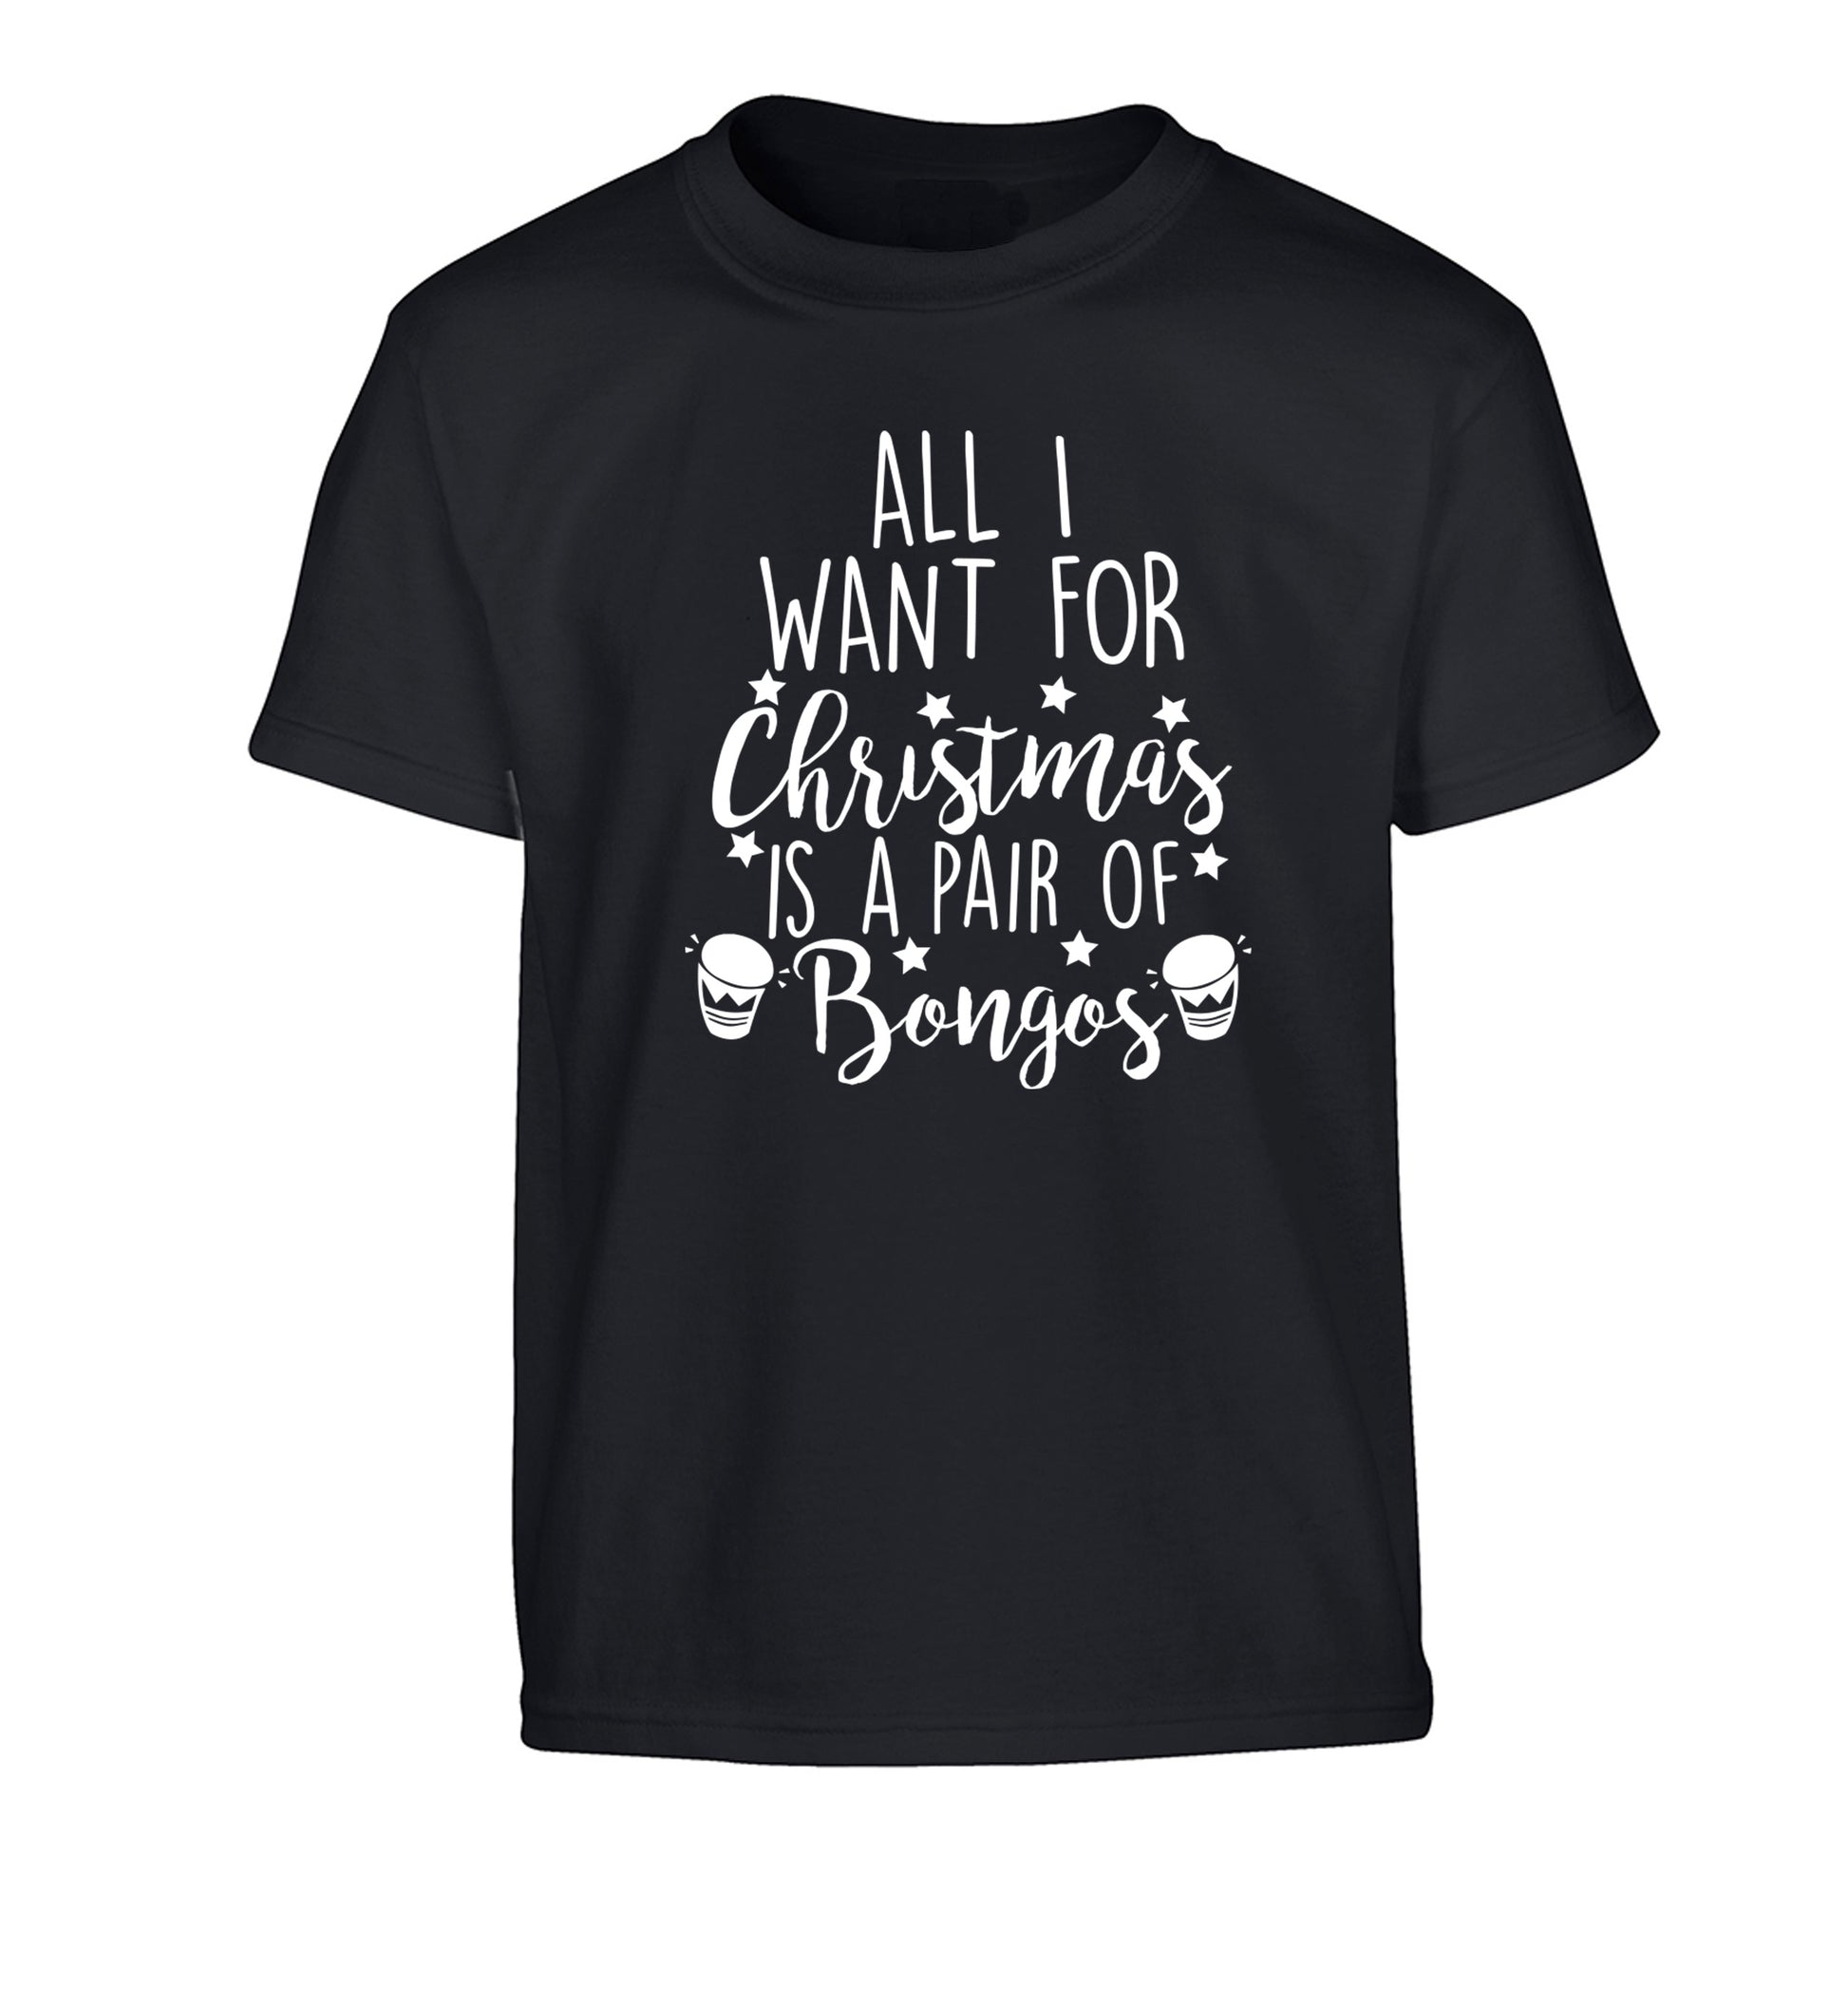 All I want for Christmas is a pair of bongos! Children's black Tshirt 12-14 Years